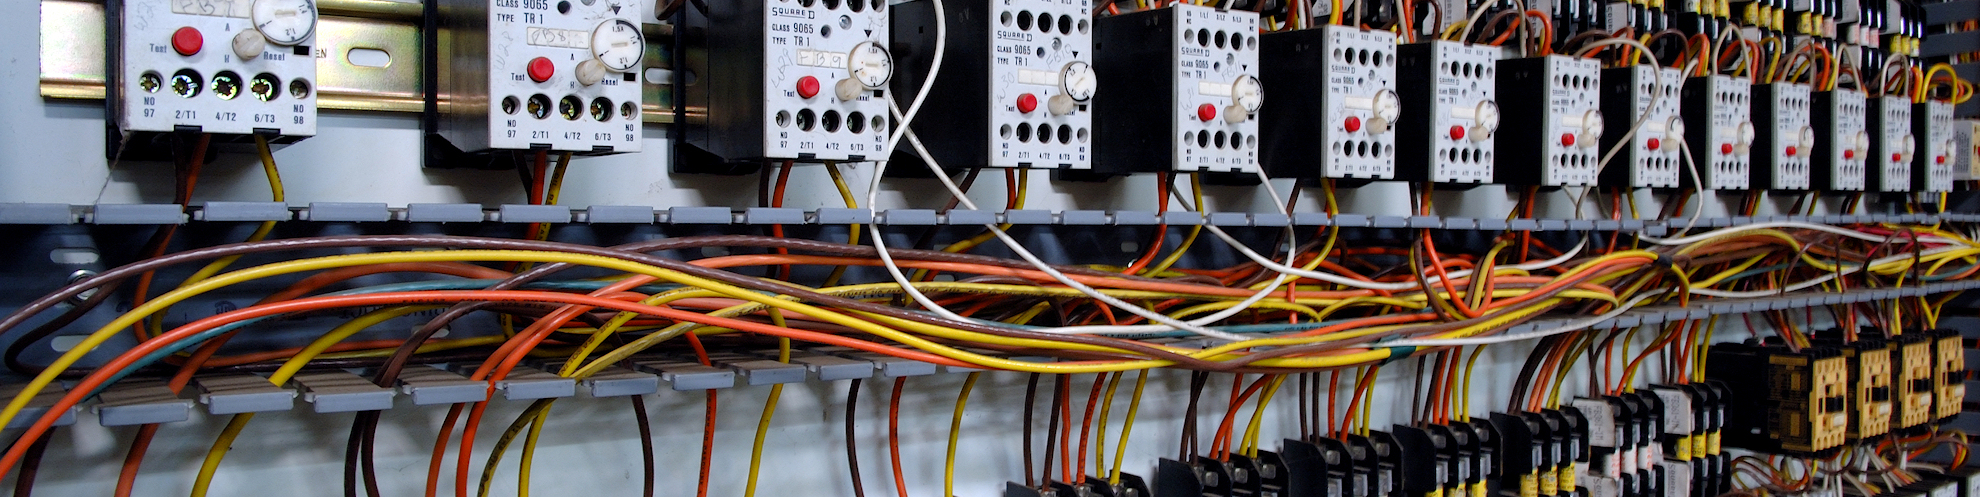 Electrical wiring panel at a assembly line factory. Controls and switches.